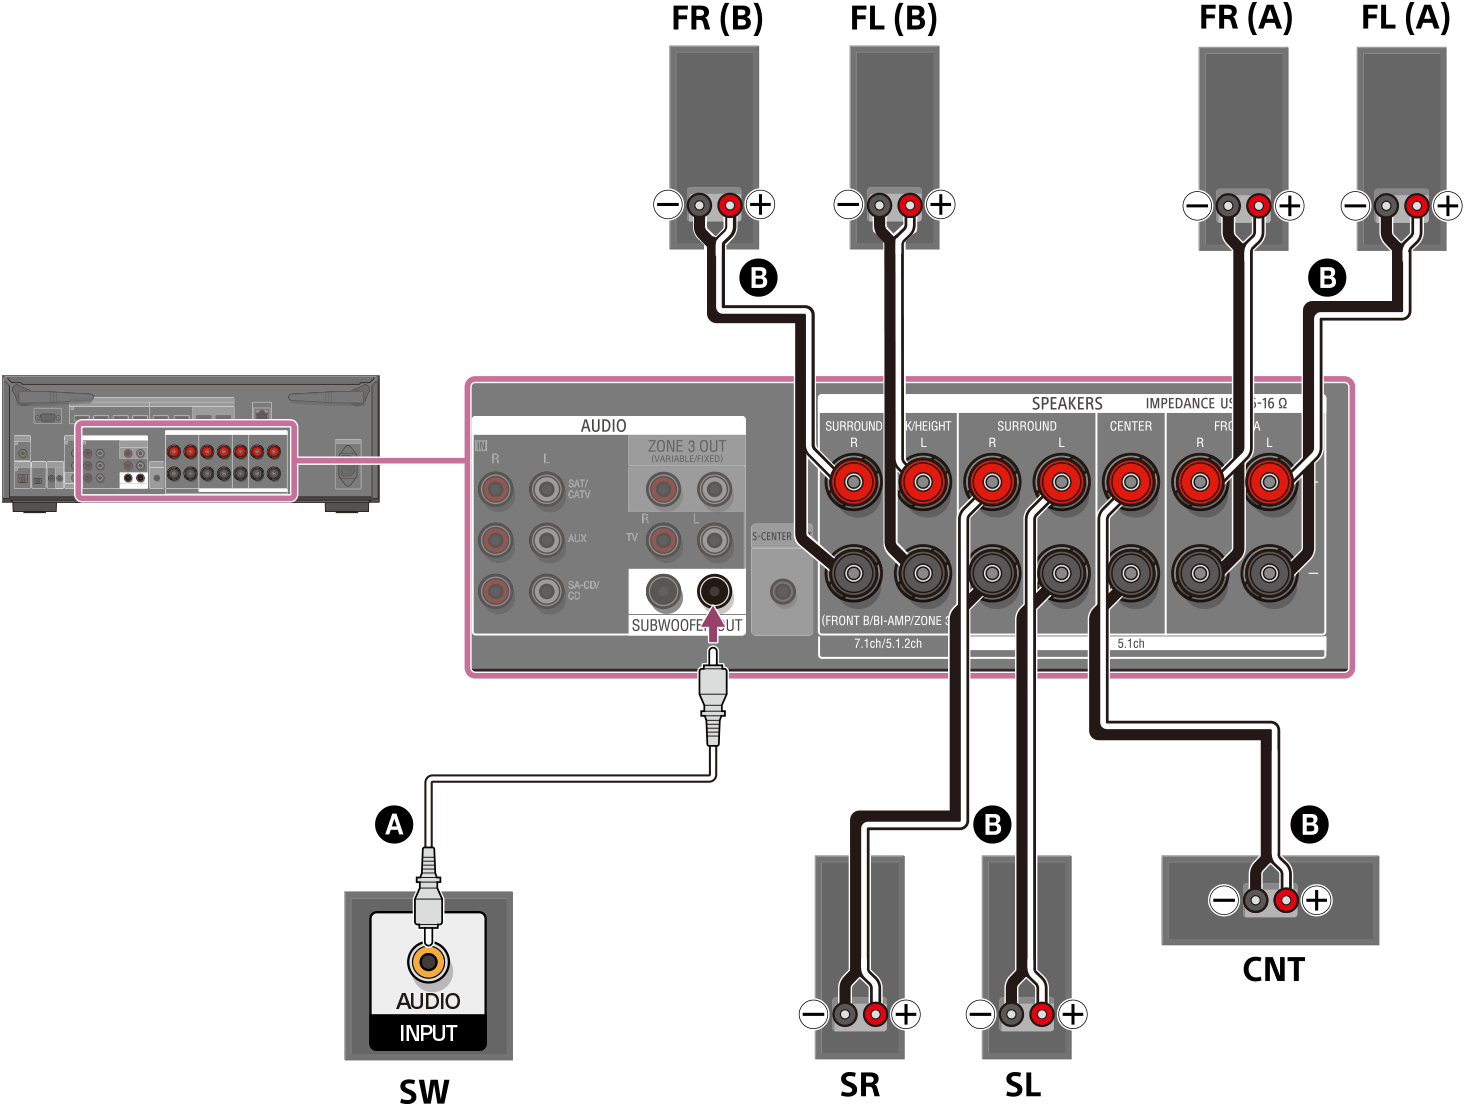 Illustration of connecting each speaker to the speaker terminals on the rear of the unit. Connect the left and right front A speakers, left and right front B speakers, left and right surround speakers, and center speaker to their respective speaker terminals using speaker cables (not supplied). Connect the subwoofer to the SUBWOOFER OUT terminal with a monaural audio cable (not supplied).